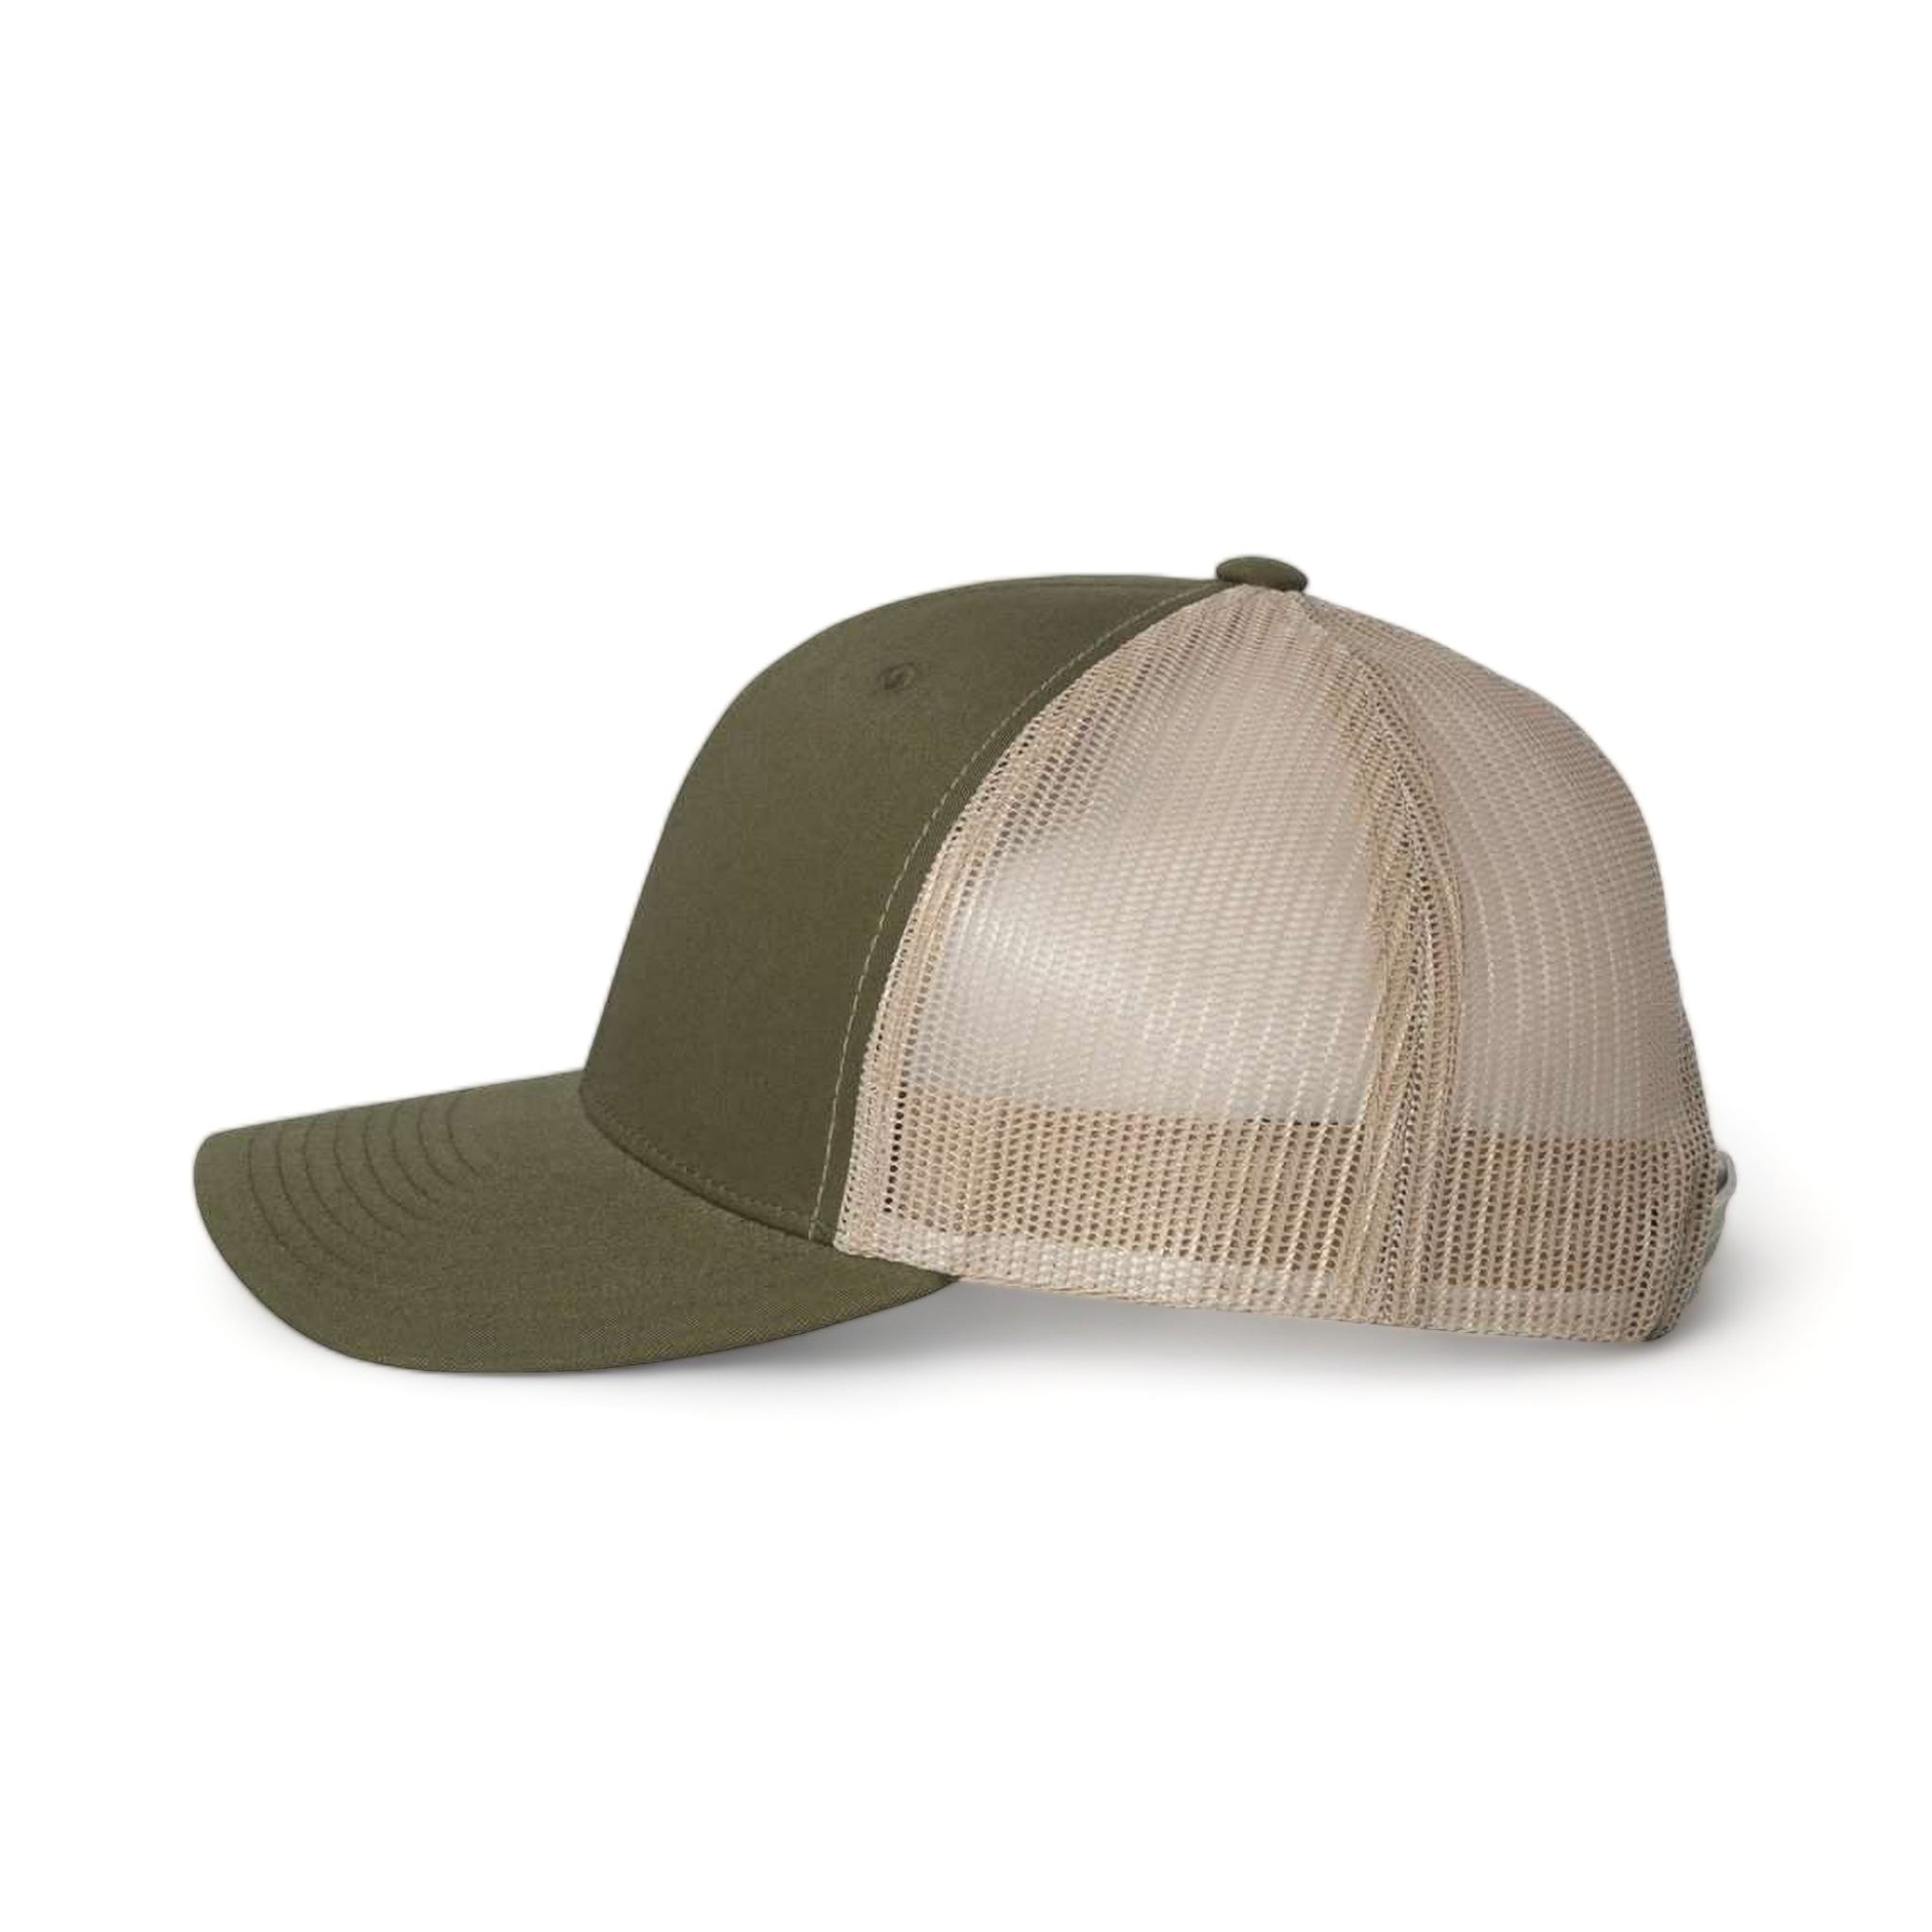 Side view of YP Classics 6606 custom hat in moss and khaki